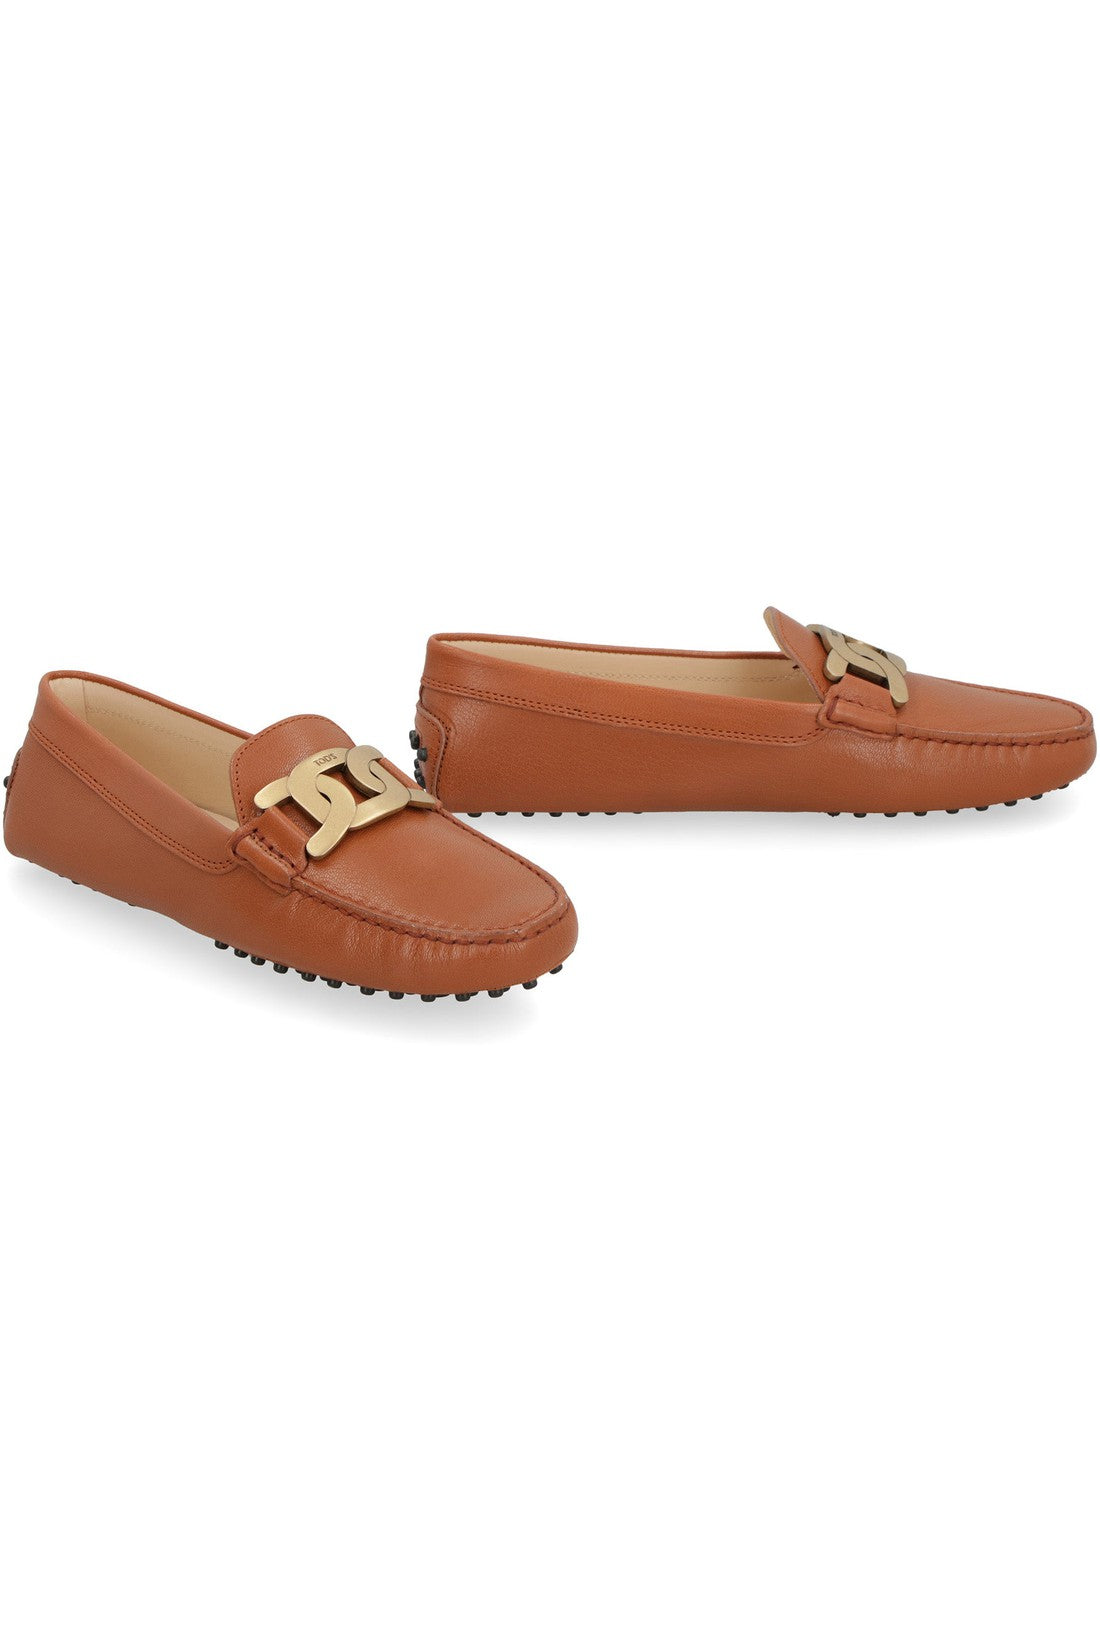 Tod's-OUTLET-SALE-Gommini leather loafers-ARCHIVIST